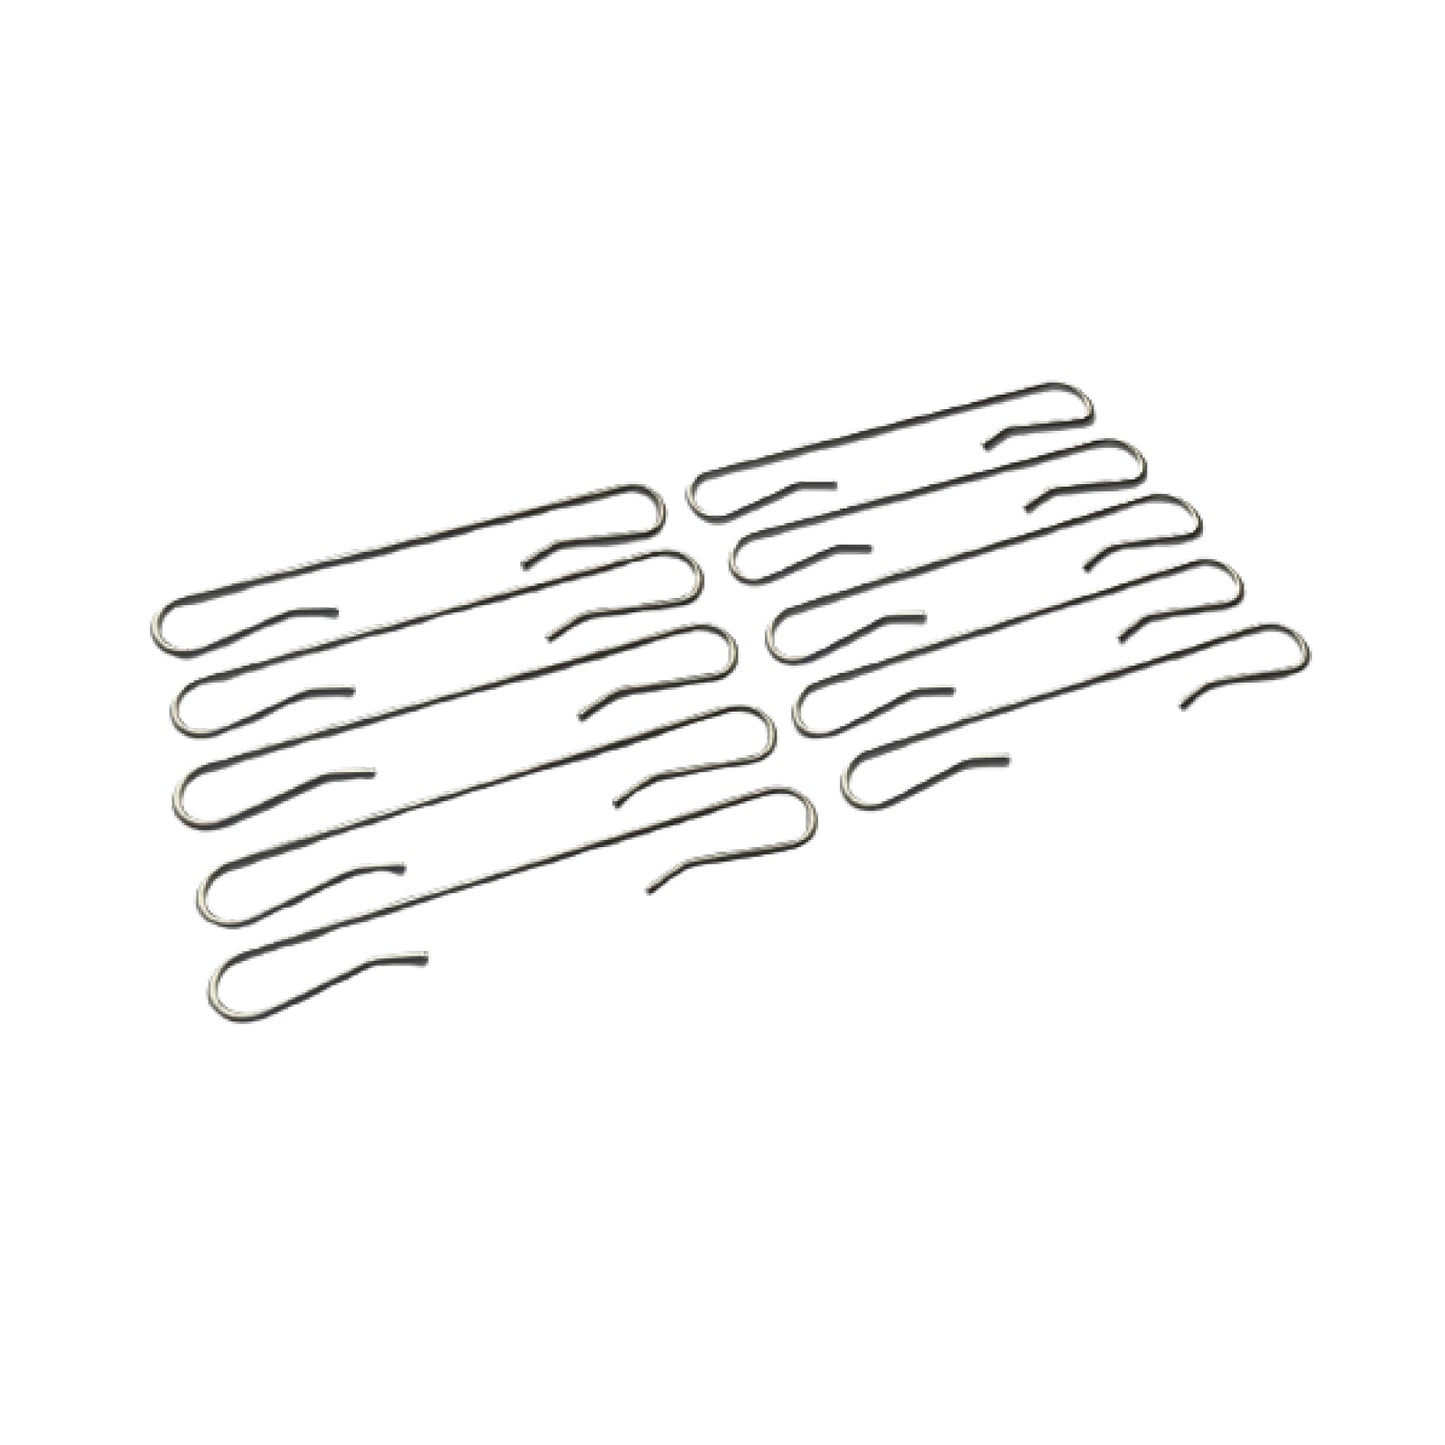 Cable separator clip, wire (10 pack)